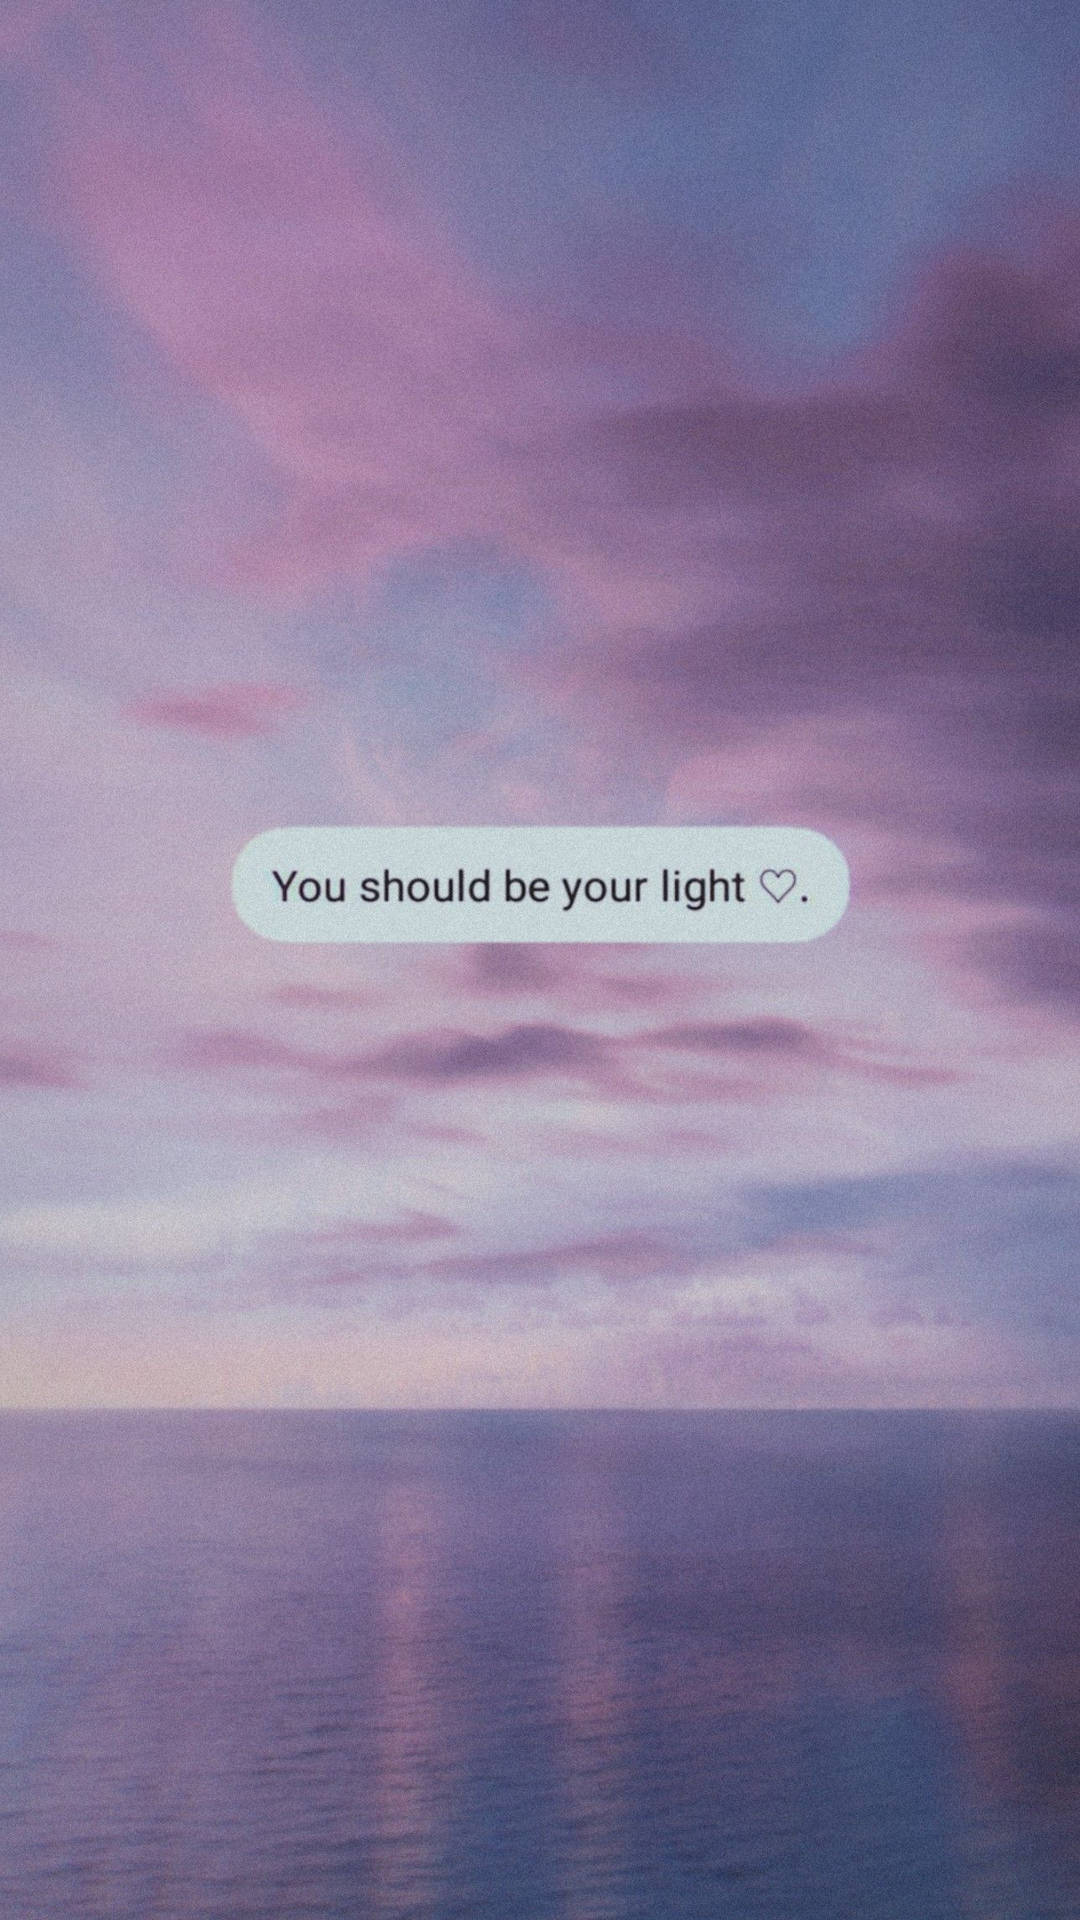 Download Be Your Light Motivational Mobile Wallpaper | Wallpapers.com